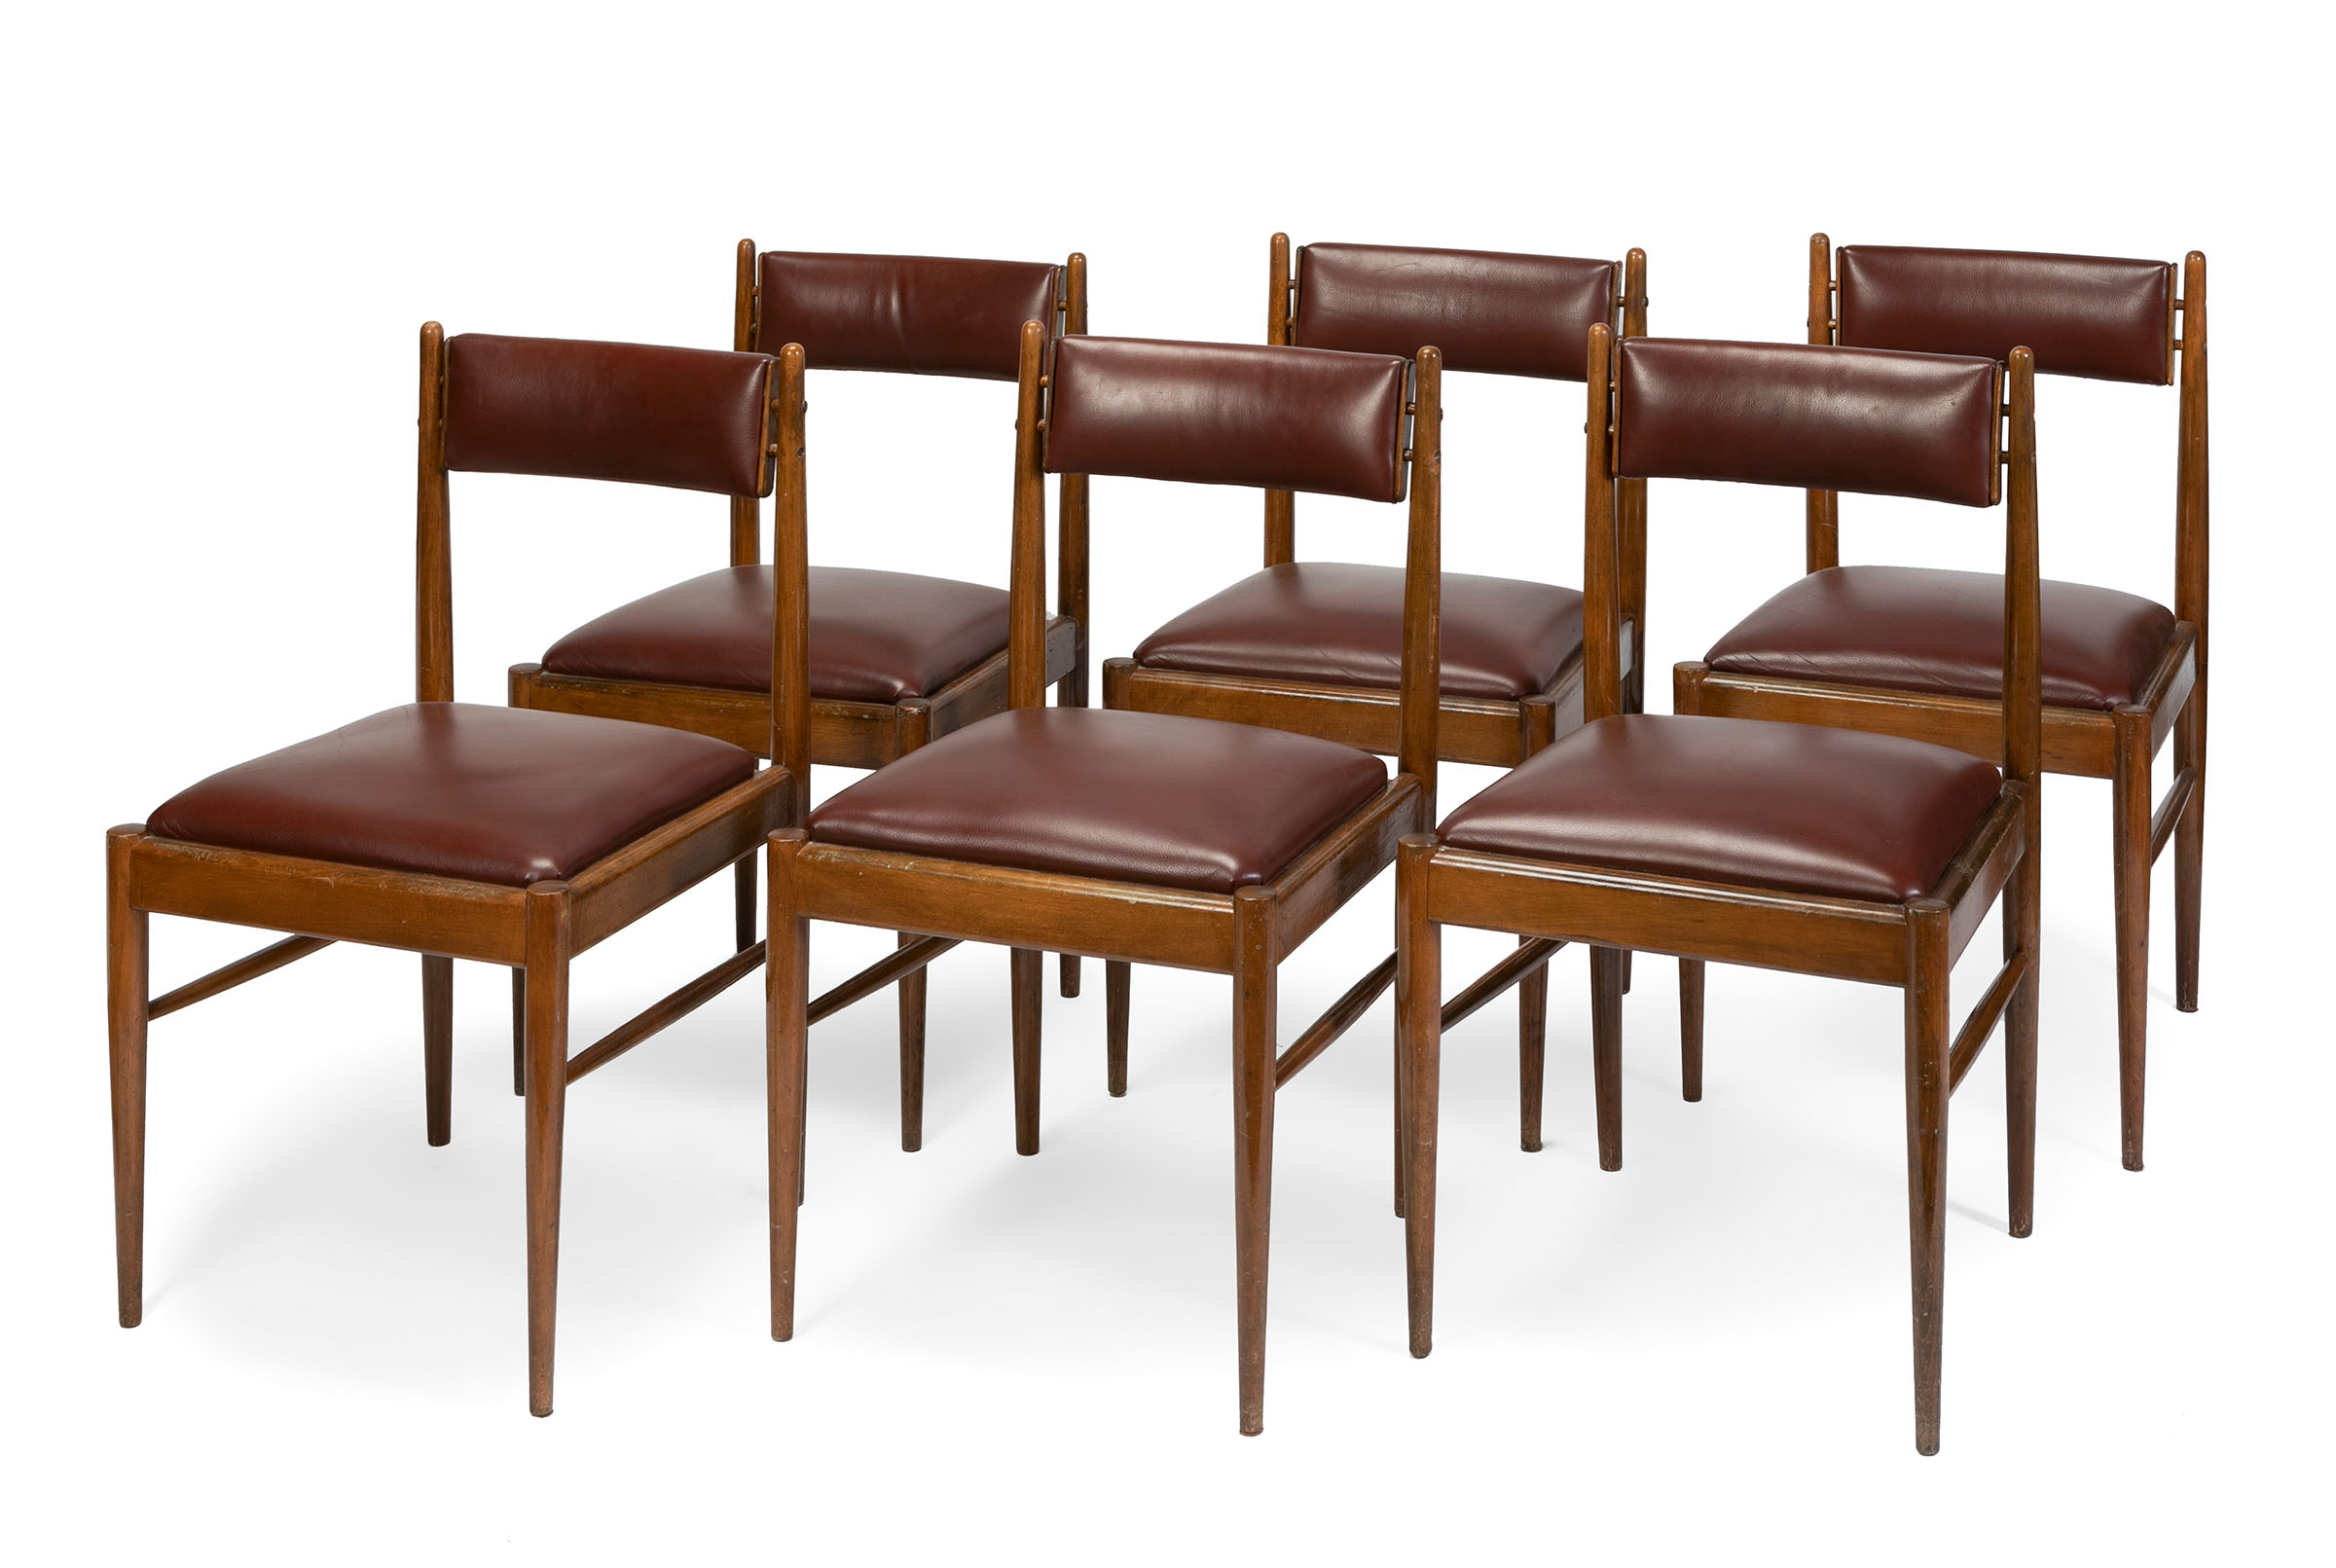 Set of six chairs, 1950s-60s.Beech wood frame and leather upholstery.In need of refinishing.